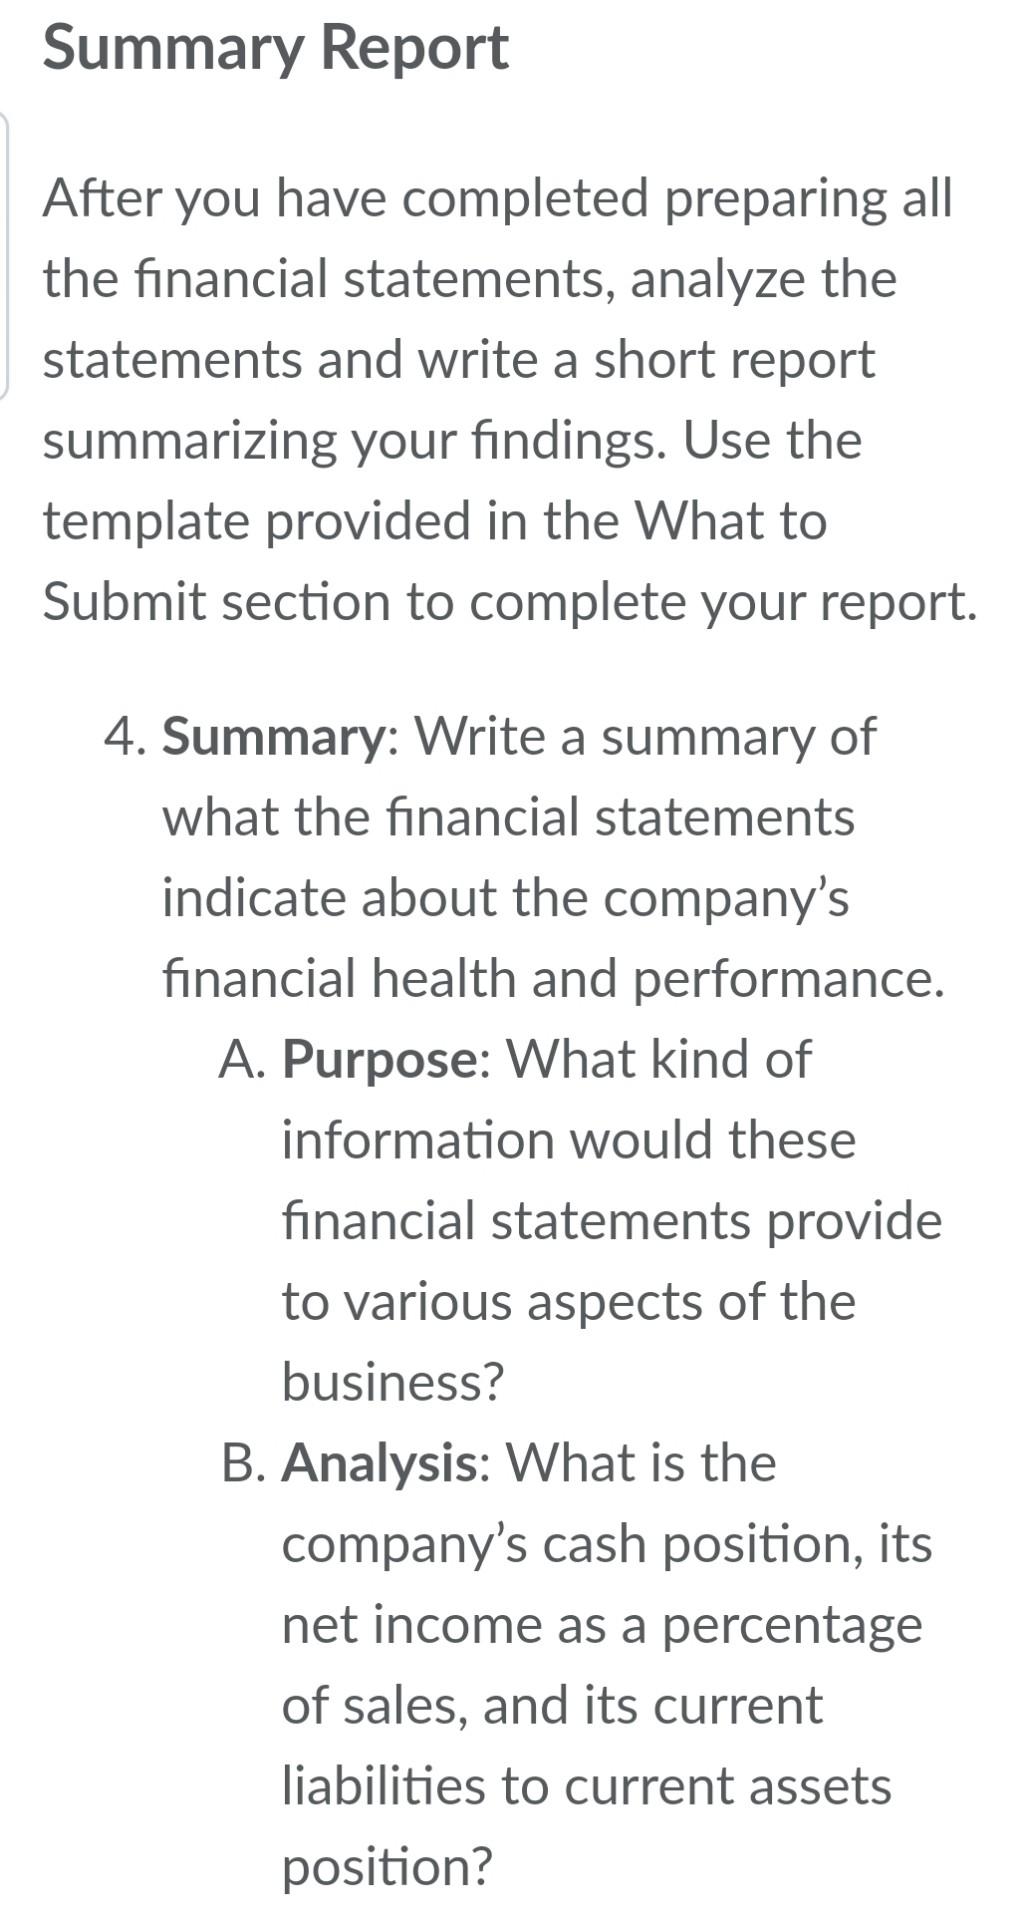 How to Prepare a Financial Report (with Pictures) - wikiHow